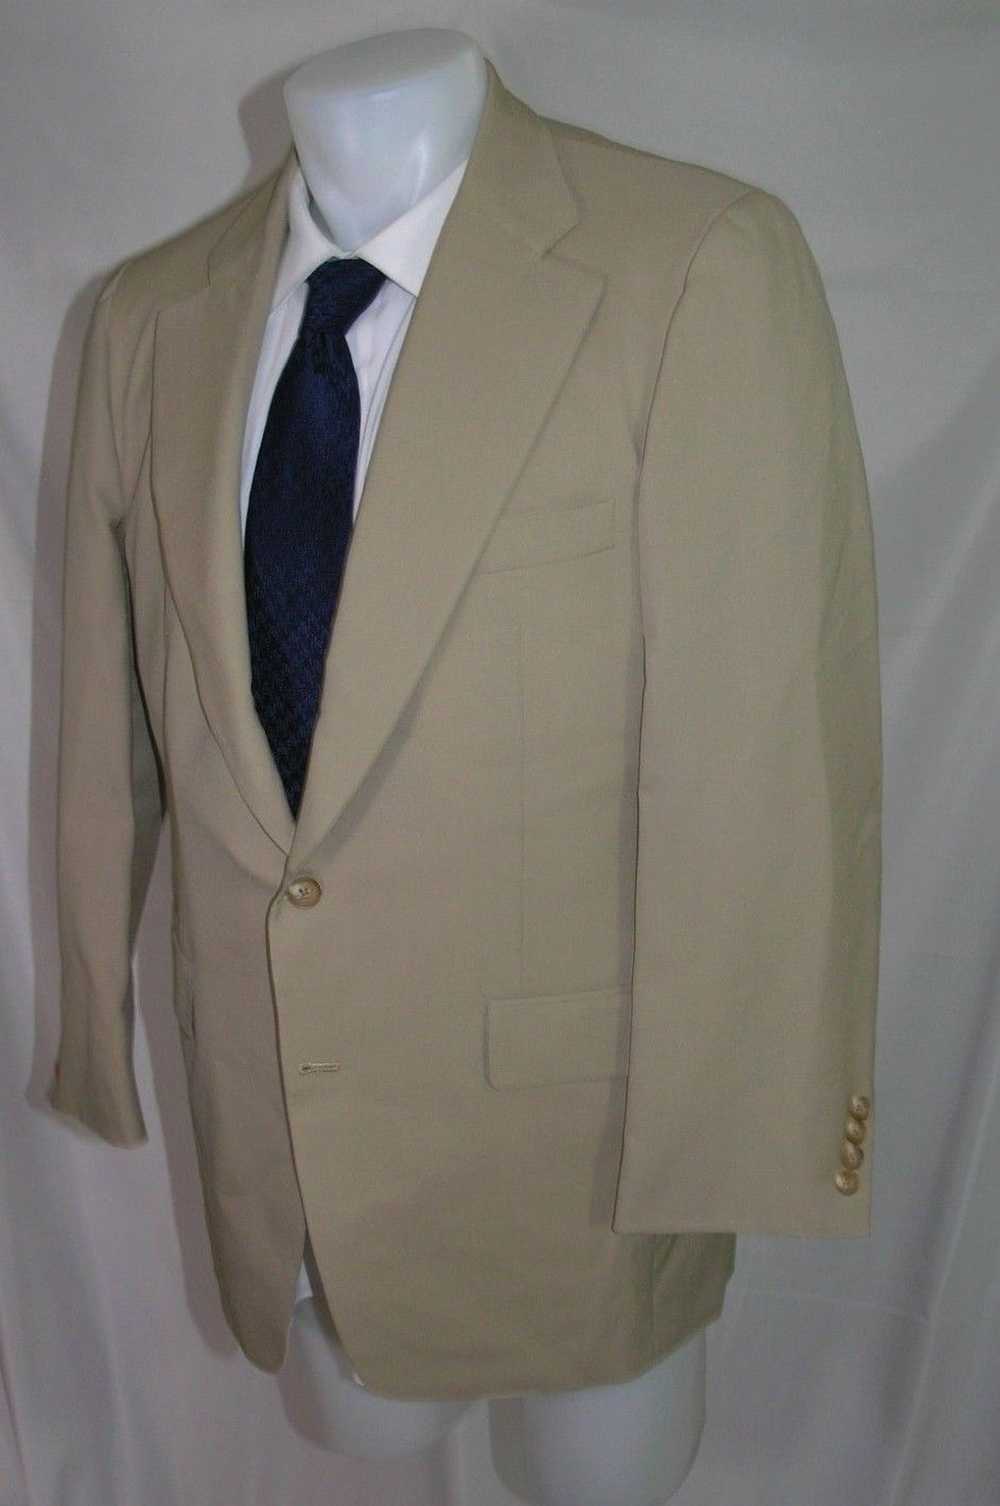 Alfred Dunhill Bespoke Two Button Blazer 40R - image 6